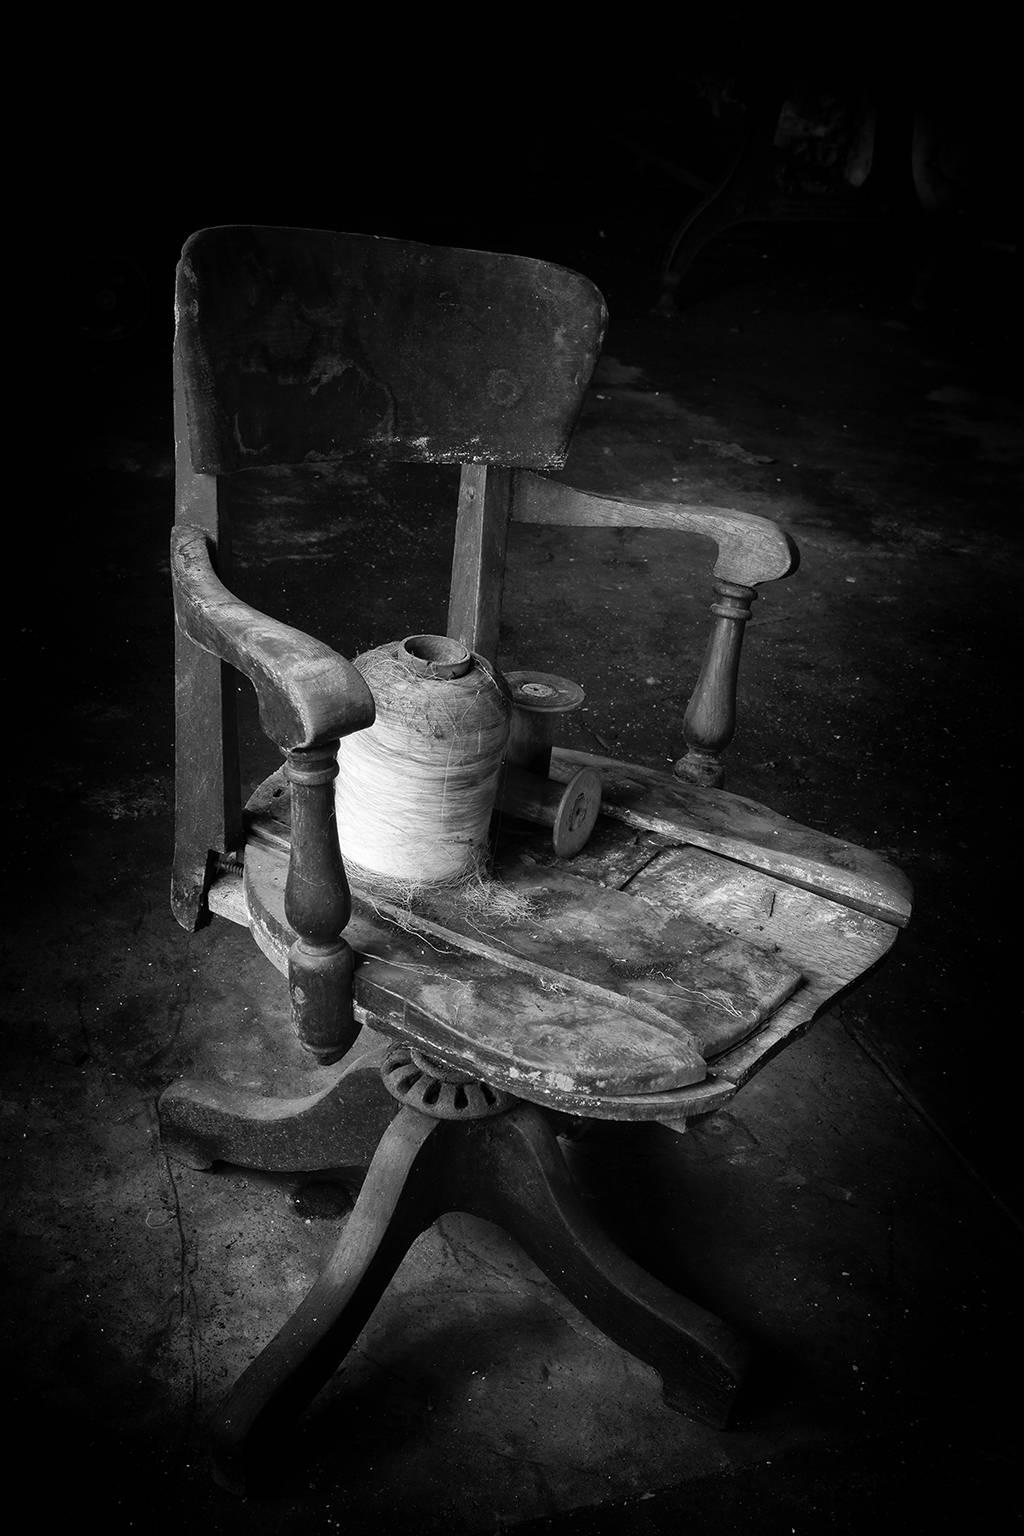 Rebecca Skinner Still-Life Photograph - "Rest", contemporary, black, white, silk mill, industrial, chair, photograph